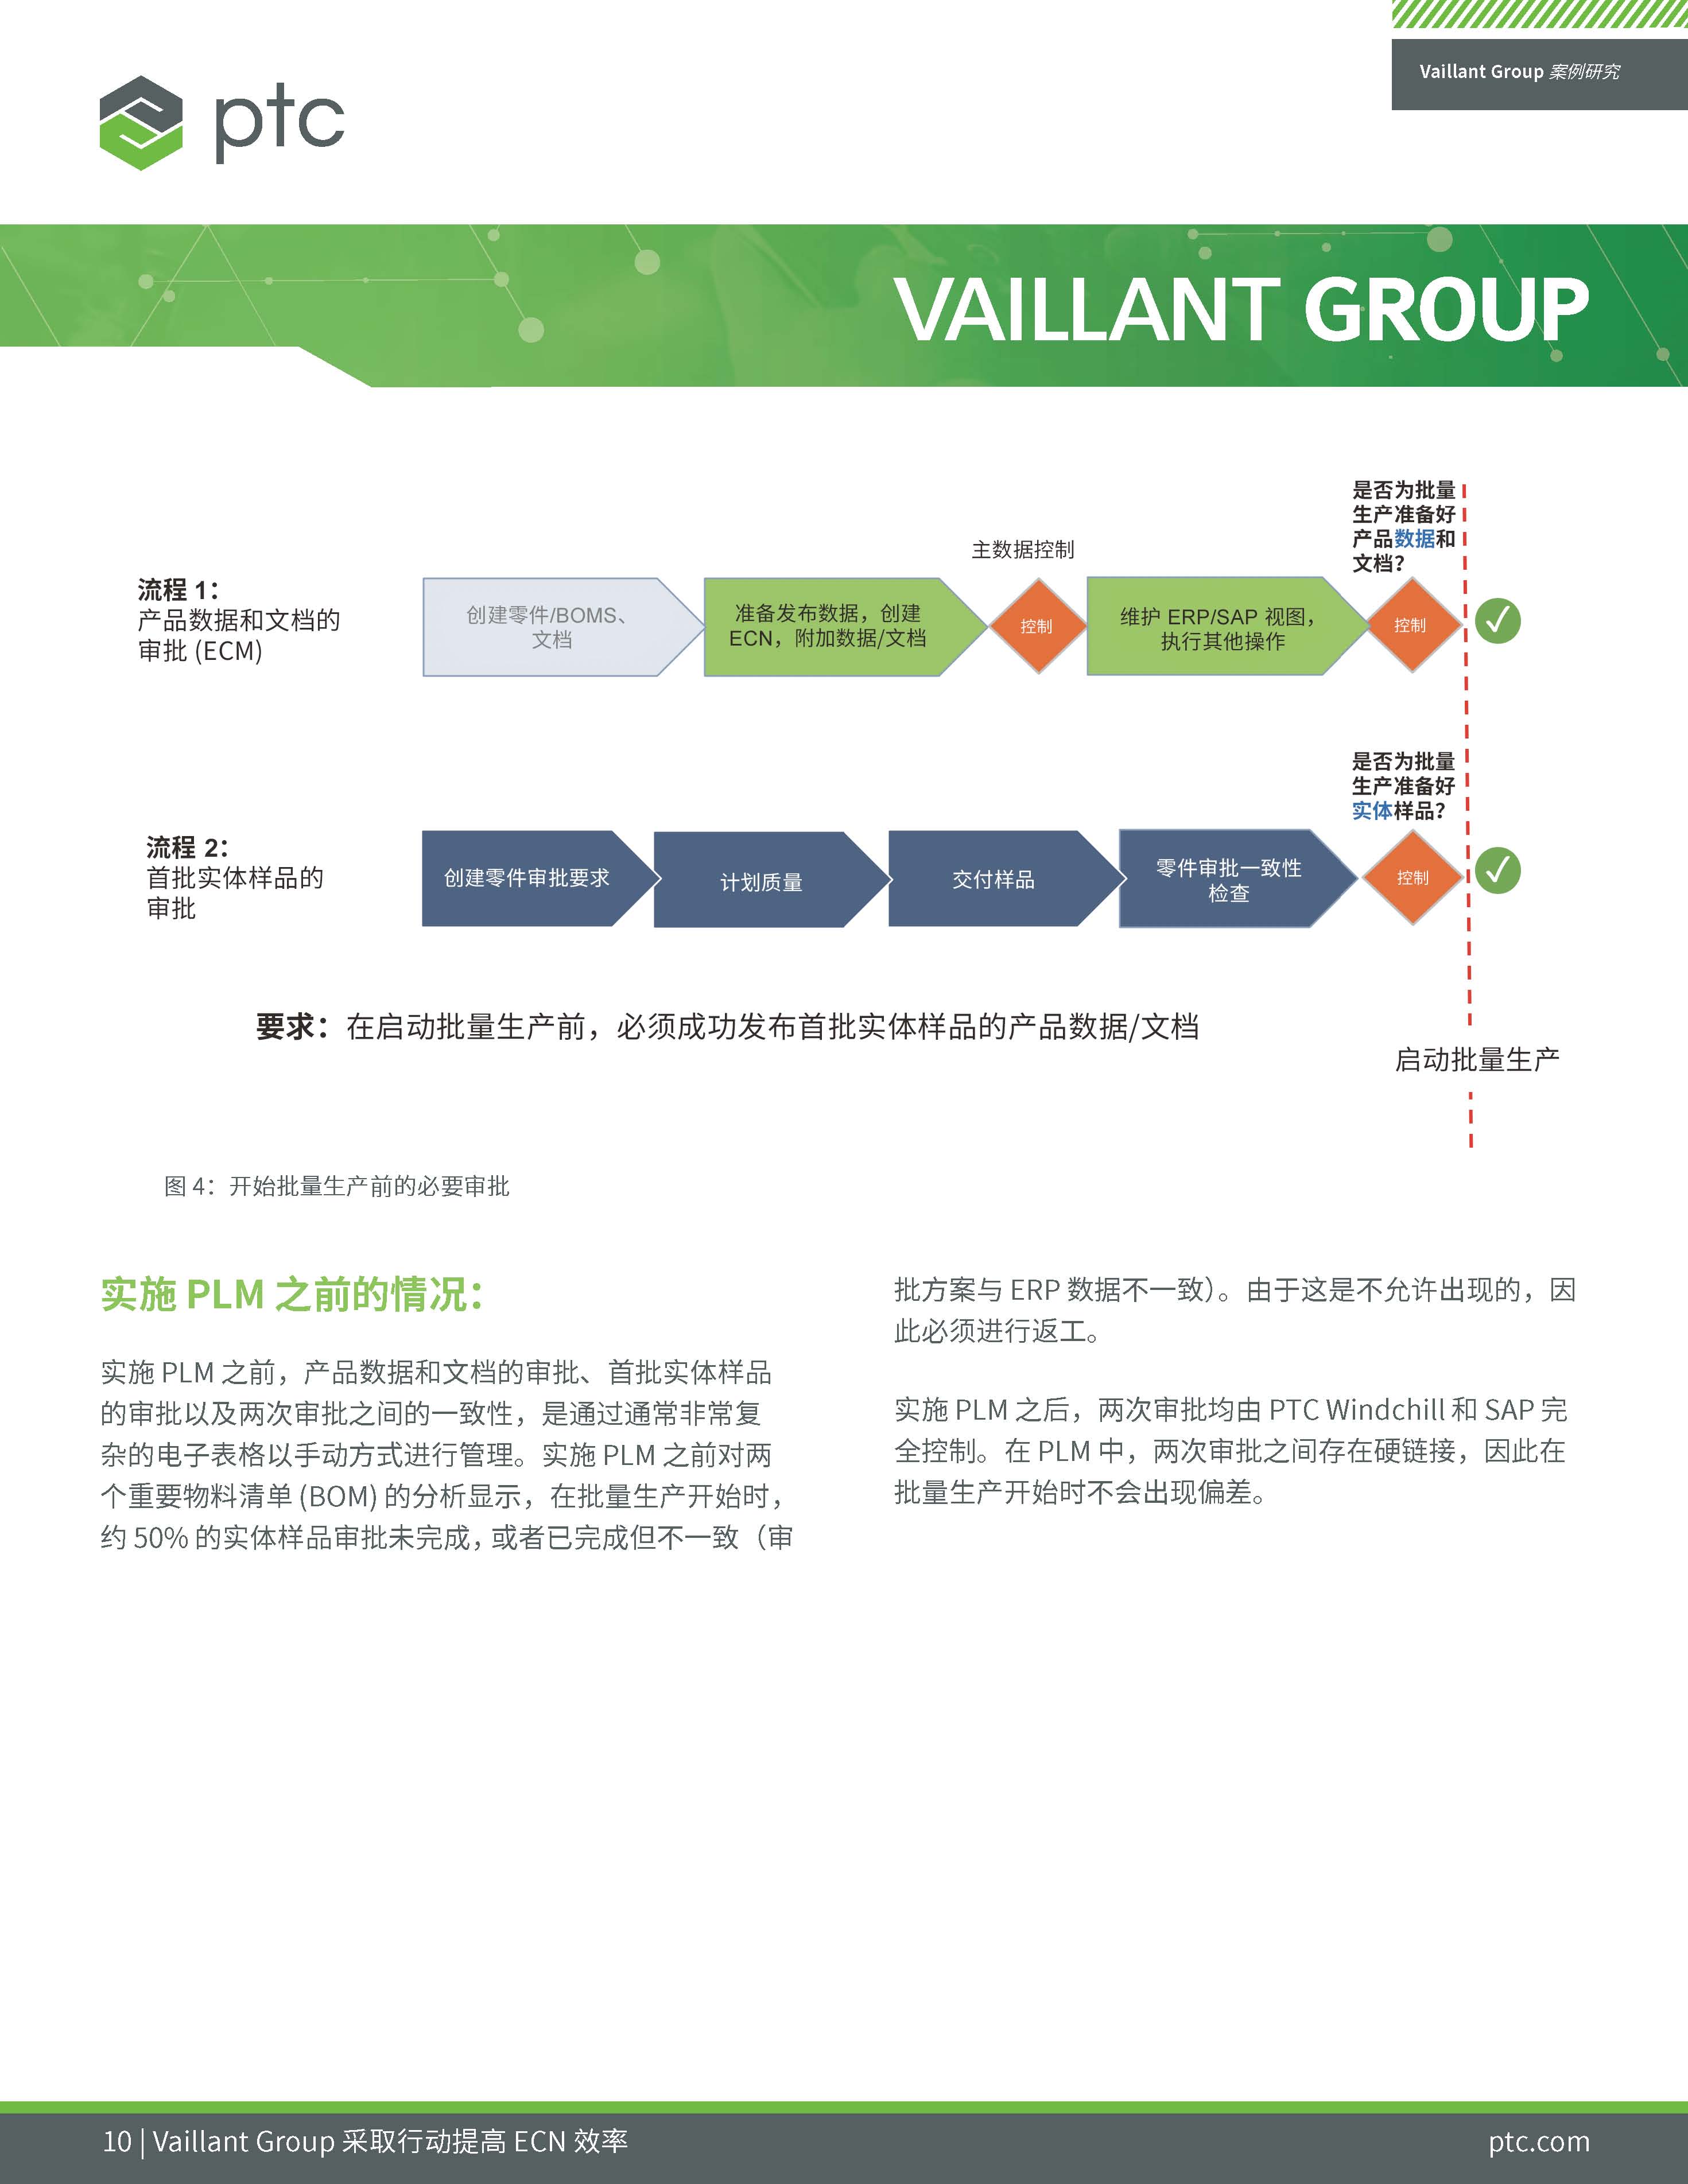 Vaillant Group's Digital Transformation (Chinese)_页面_10.jpg